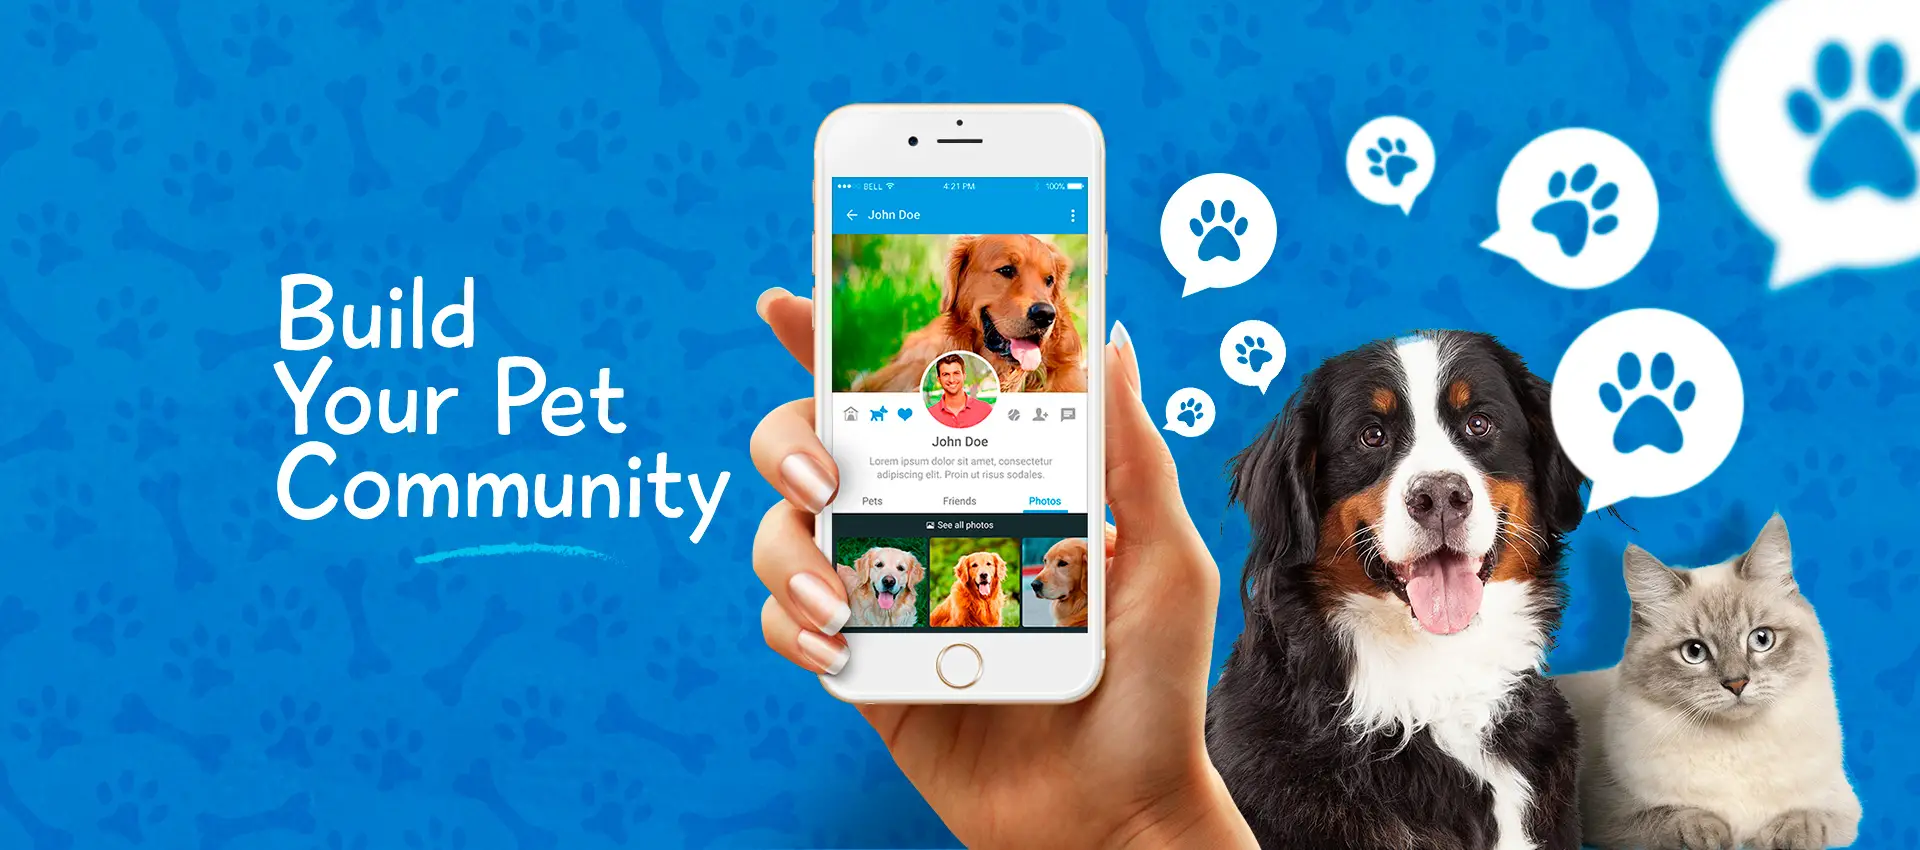 5 Top rated Best Pets Android apps 2020